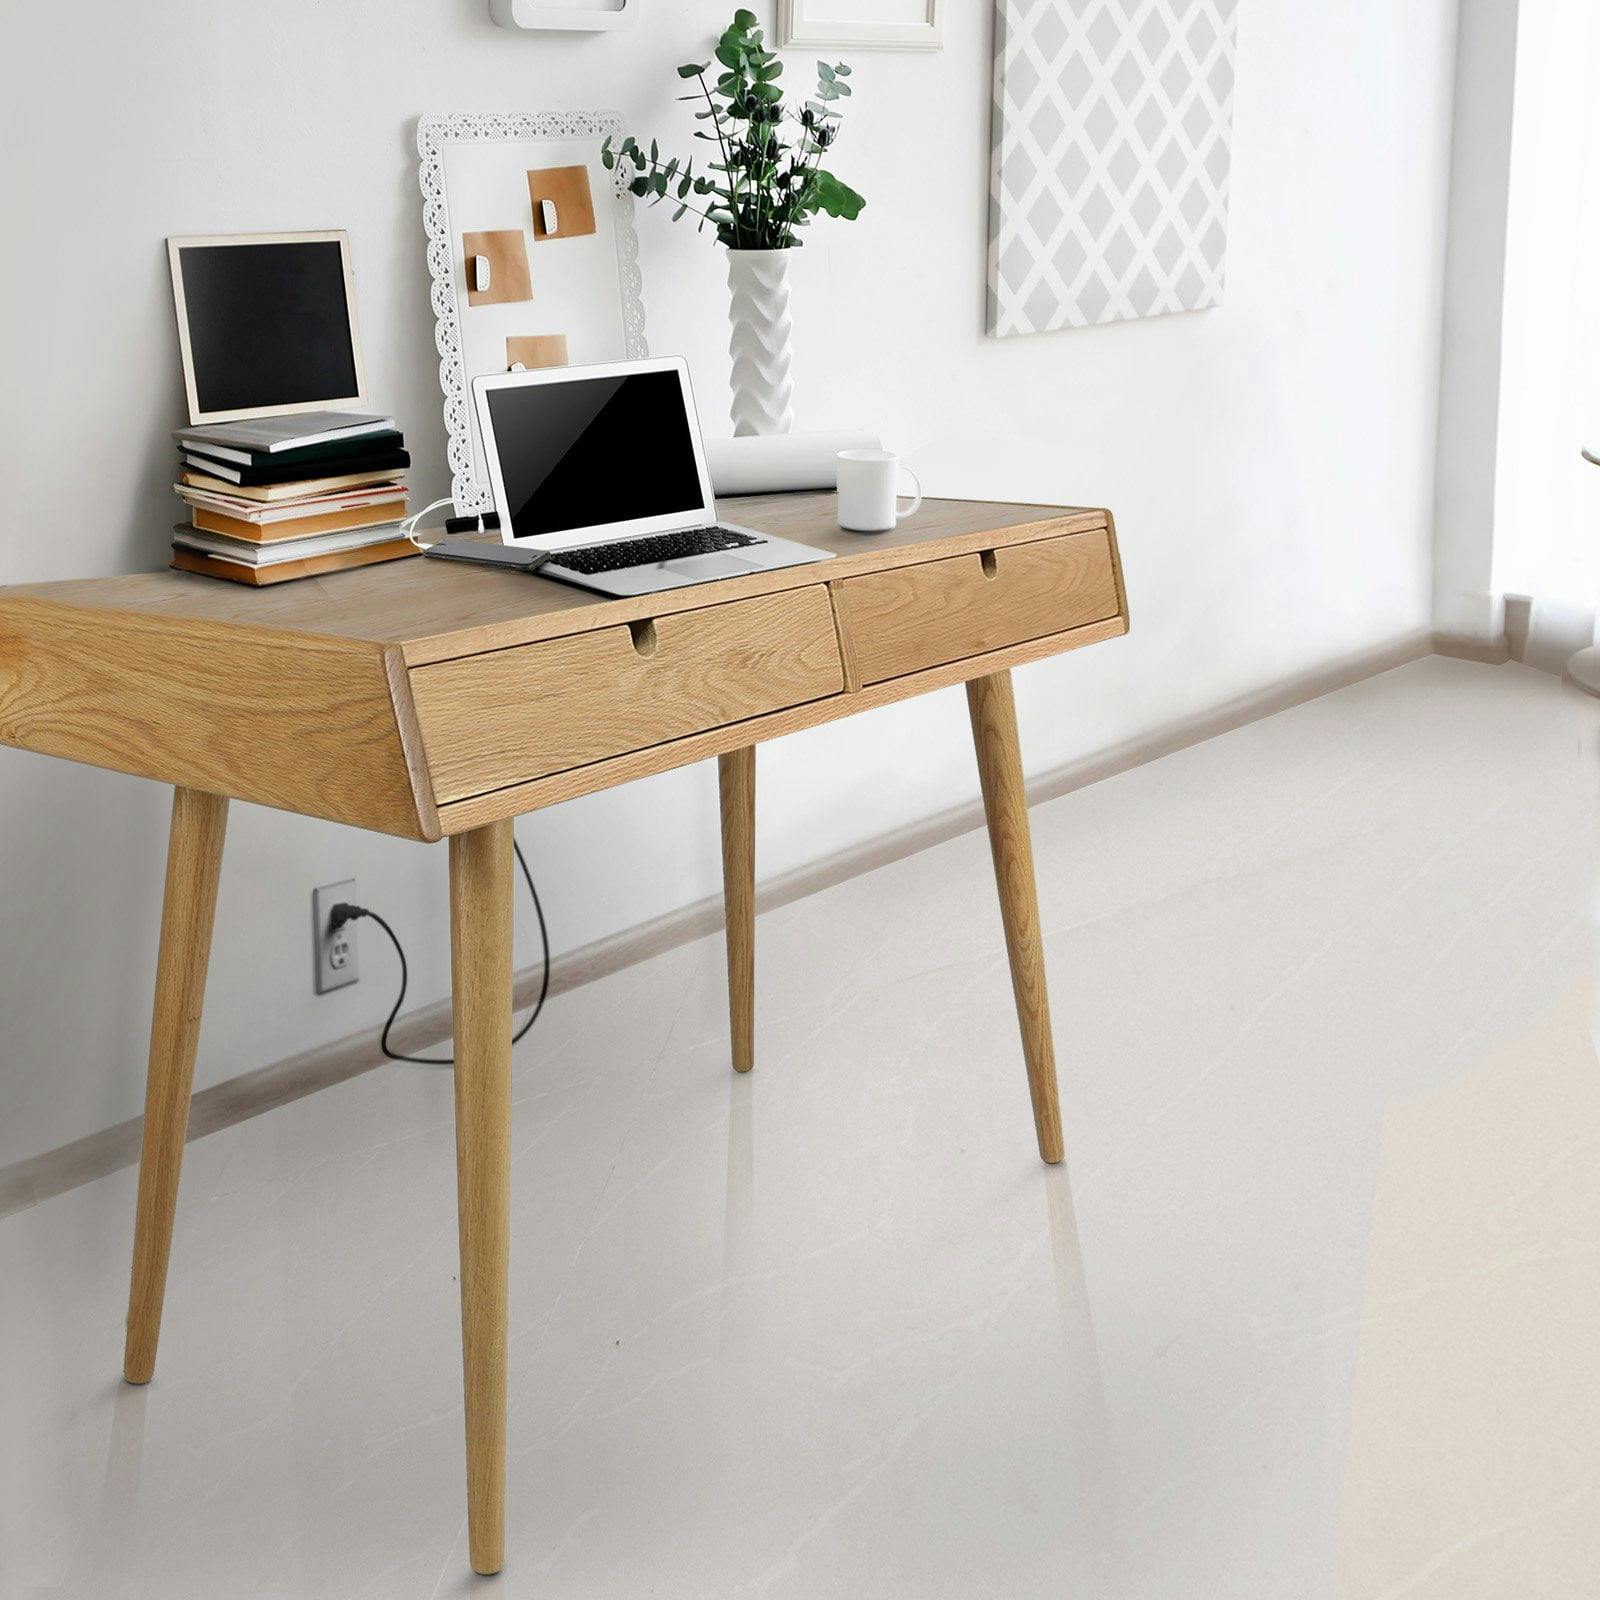 Oakwood Liberty Desk with Sliding Drawers & Built-in USB Ports